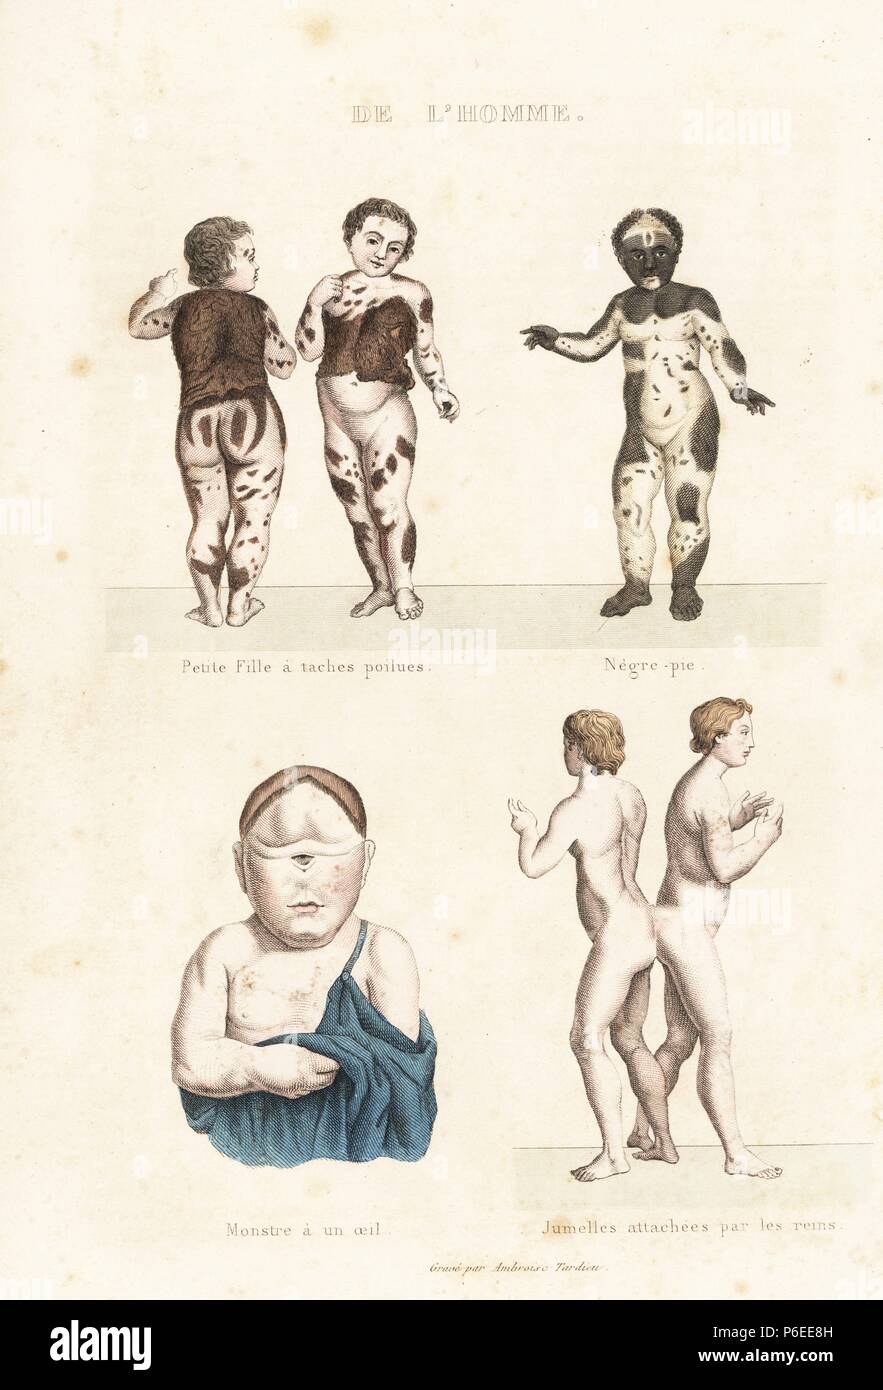 Young girl with hirsutism, boy with vitiligo, child with one eye, conjoined twins. Handcoloured engraving on steel by Ambroise Tardieu from Richard's 'New Edition of the Complete Works of Buffon,' Pourrat Freres, Paris, 1837. Stock Photo